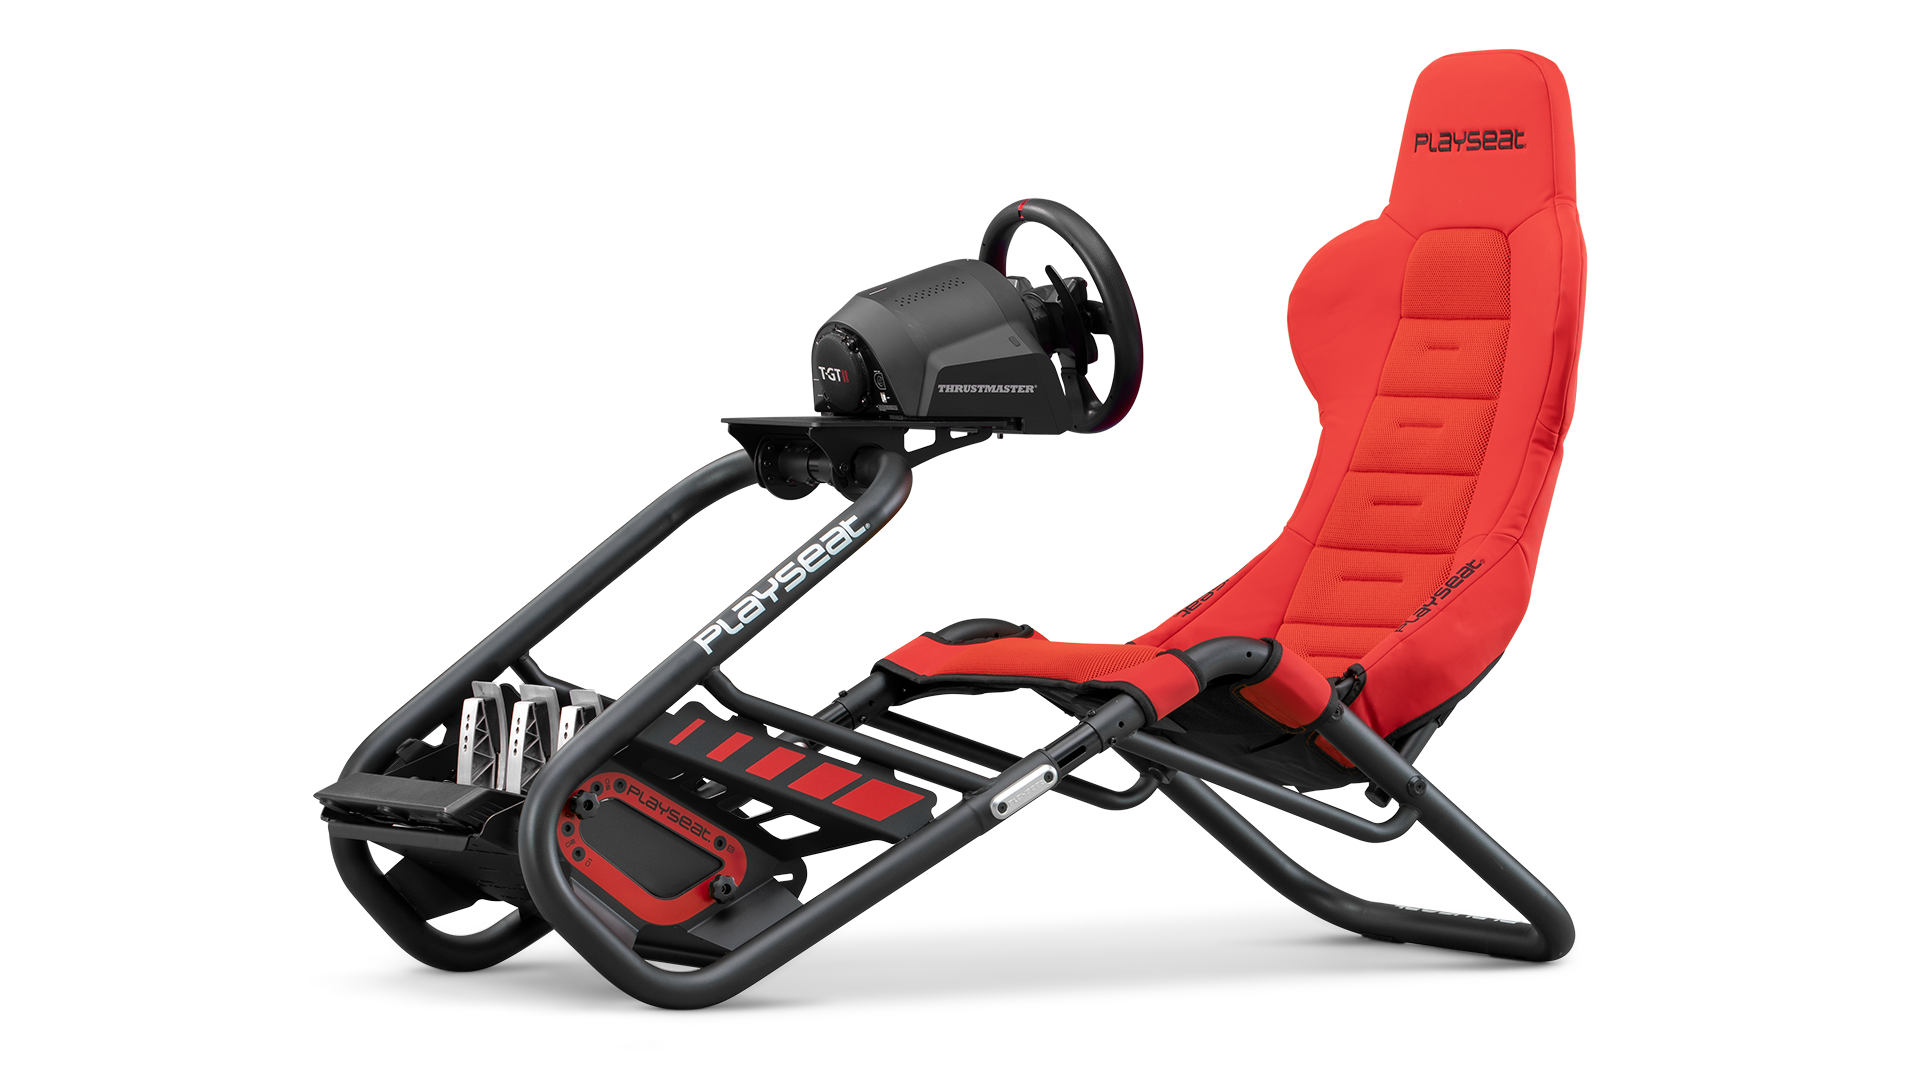 playseat-trophy-red-direct-drive-simulator-front-angle-view-thrustmaster-1920x1080-3.png